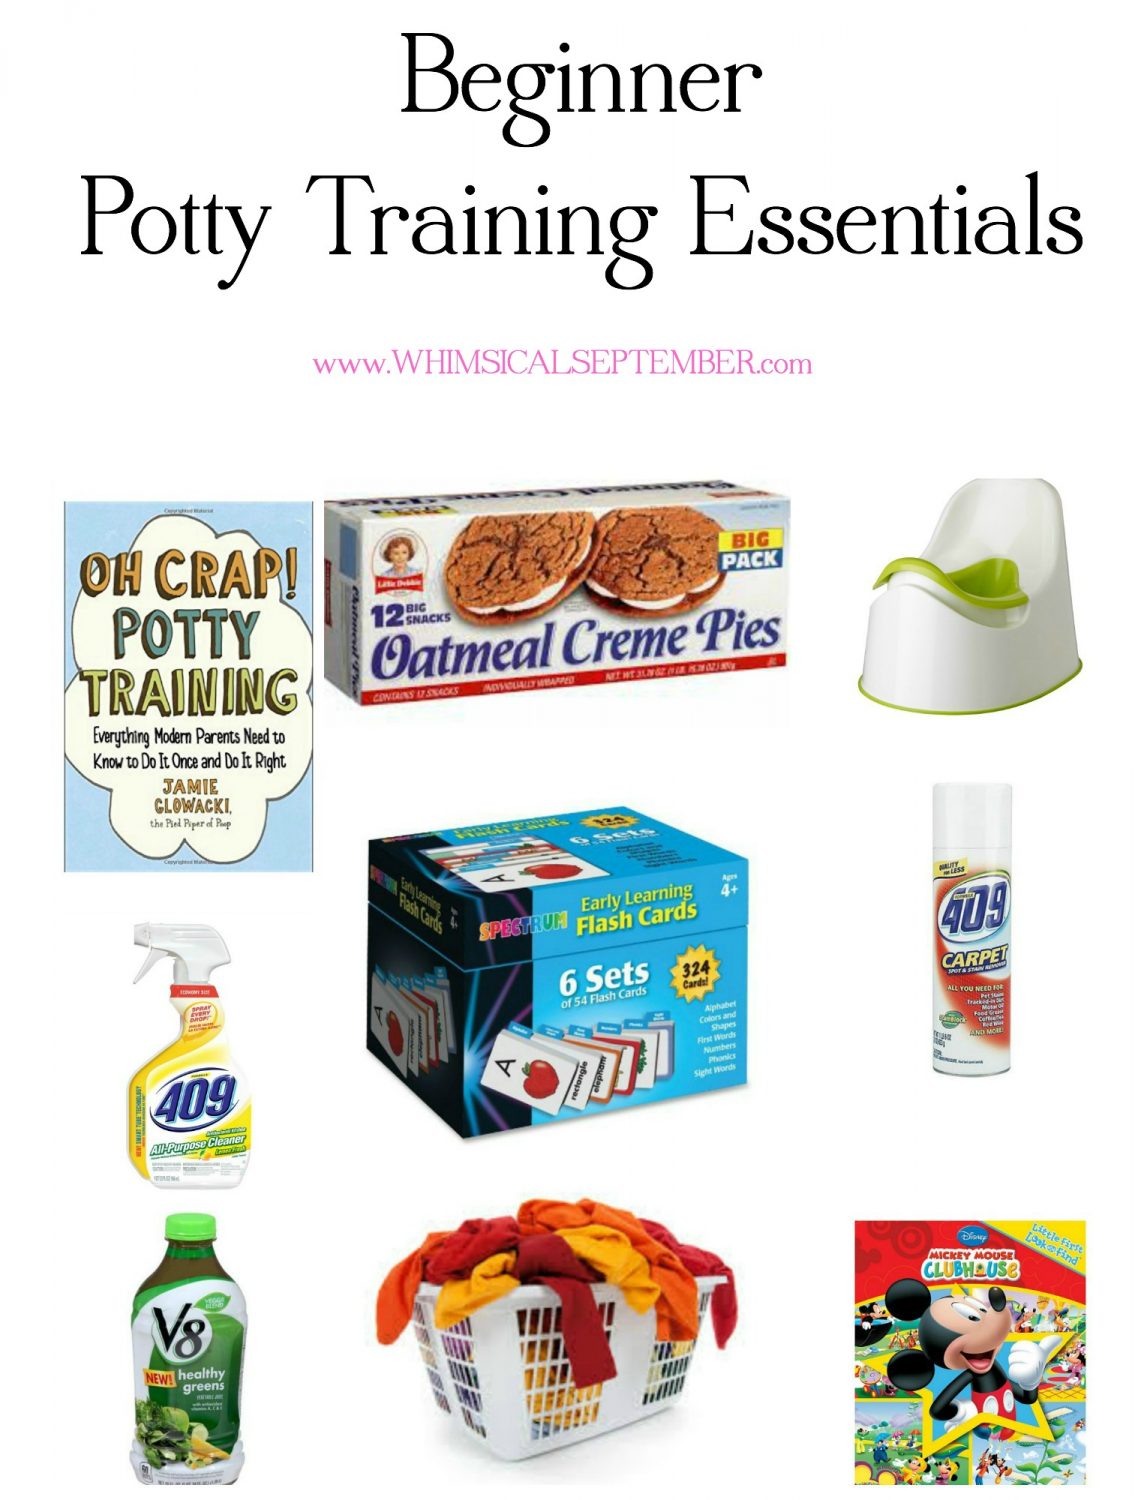 This post gives an overview of how the Oh Crap Potty Training book aided in potty training our young girls. This book is fantastic for potty training boys and girls and includes humor, tips, reward ideas, ideas for when to start, and encouragement when your child is stubborn. Click here to read a realistic idea of how this program worked with two children from start to finish.